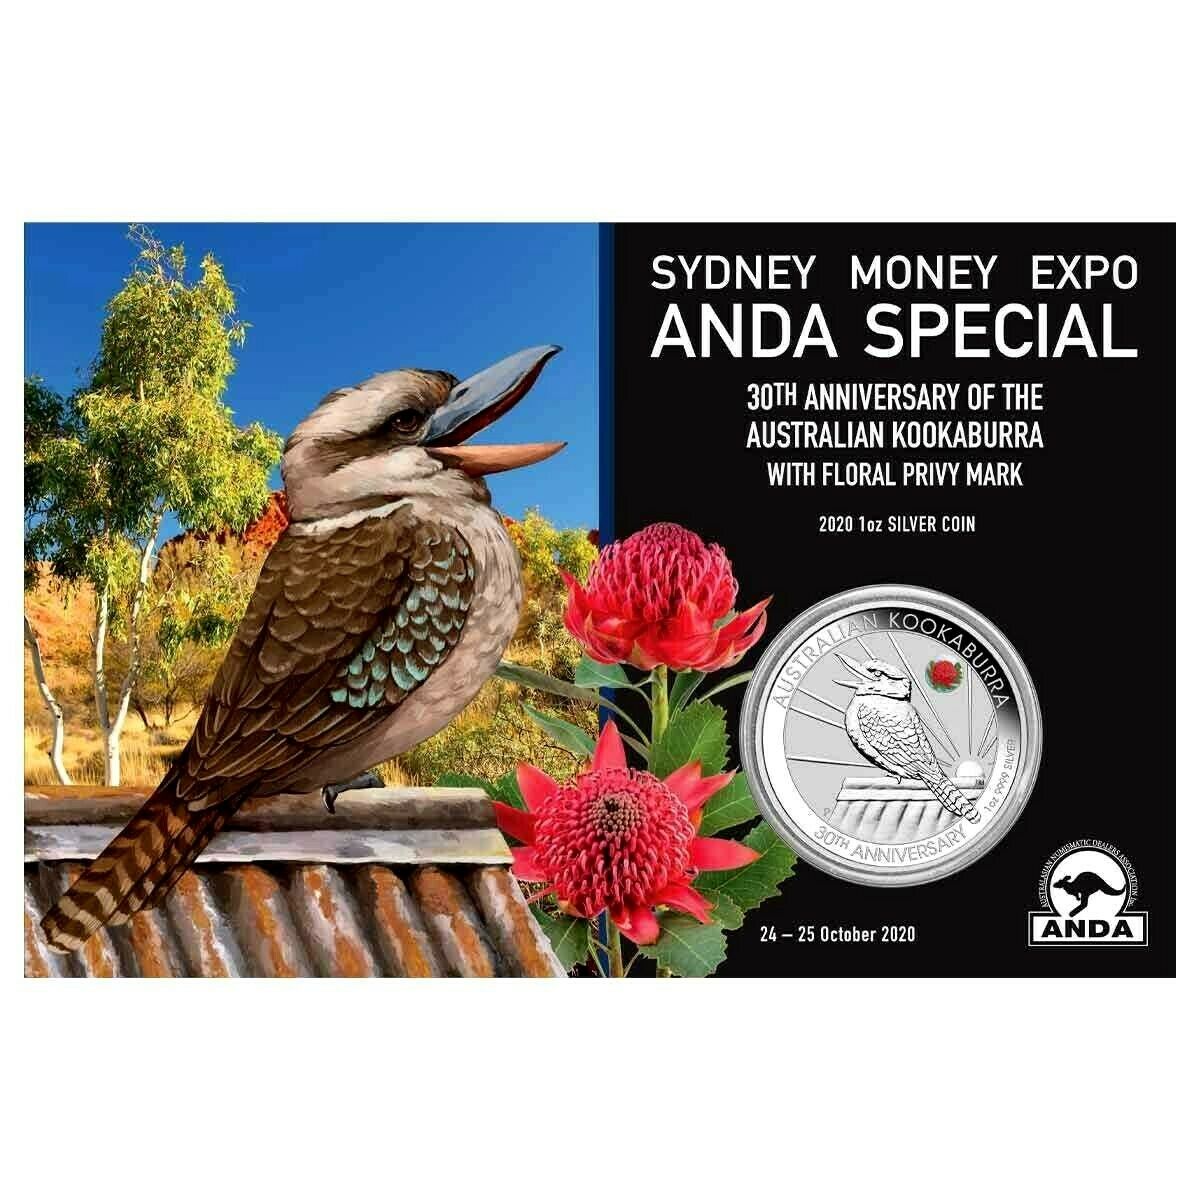 Thumbnail for 2020 Sydney ANDA Expo Special 30th Anniversary Australian Kookaburra 1oz Silver Coin with Floral Privy Mark